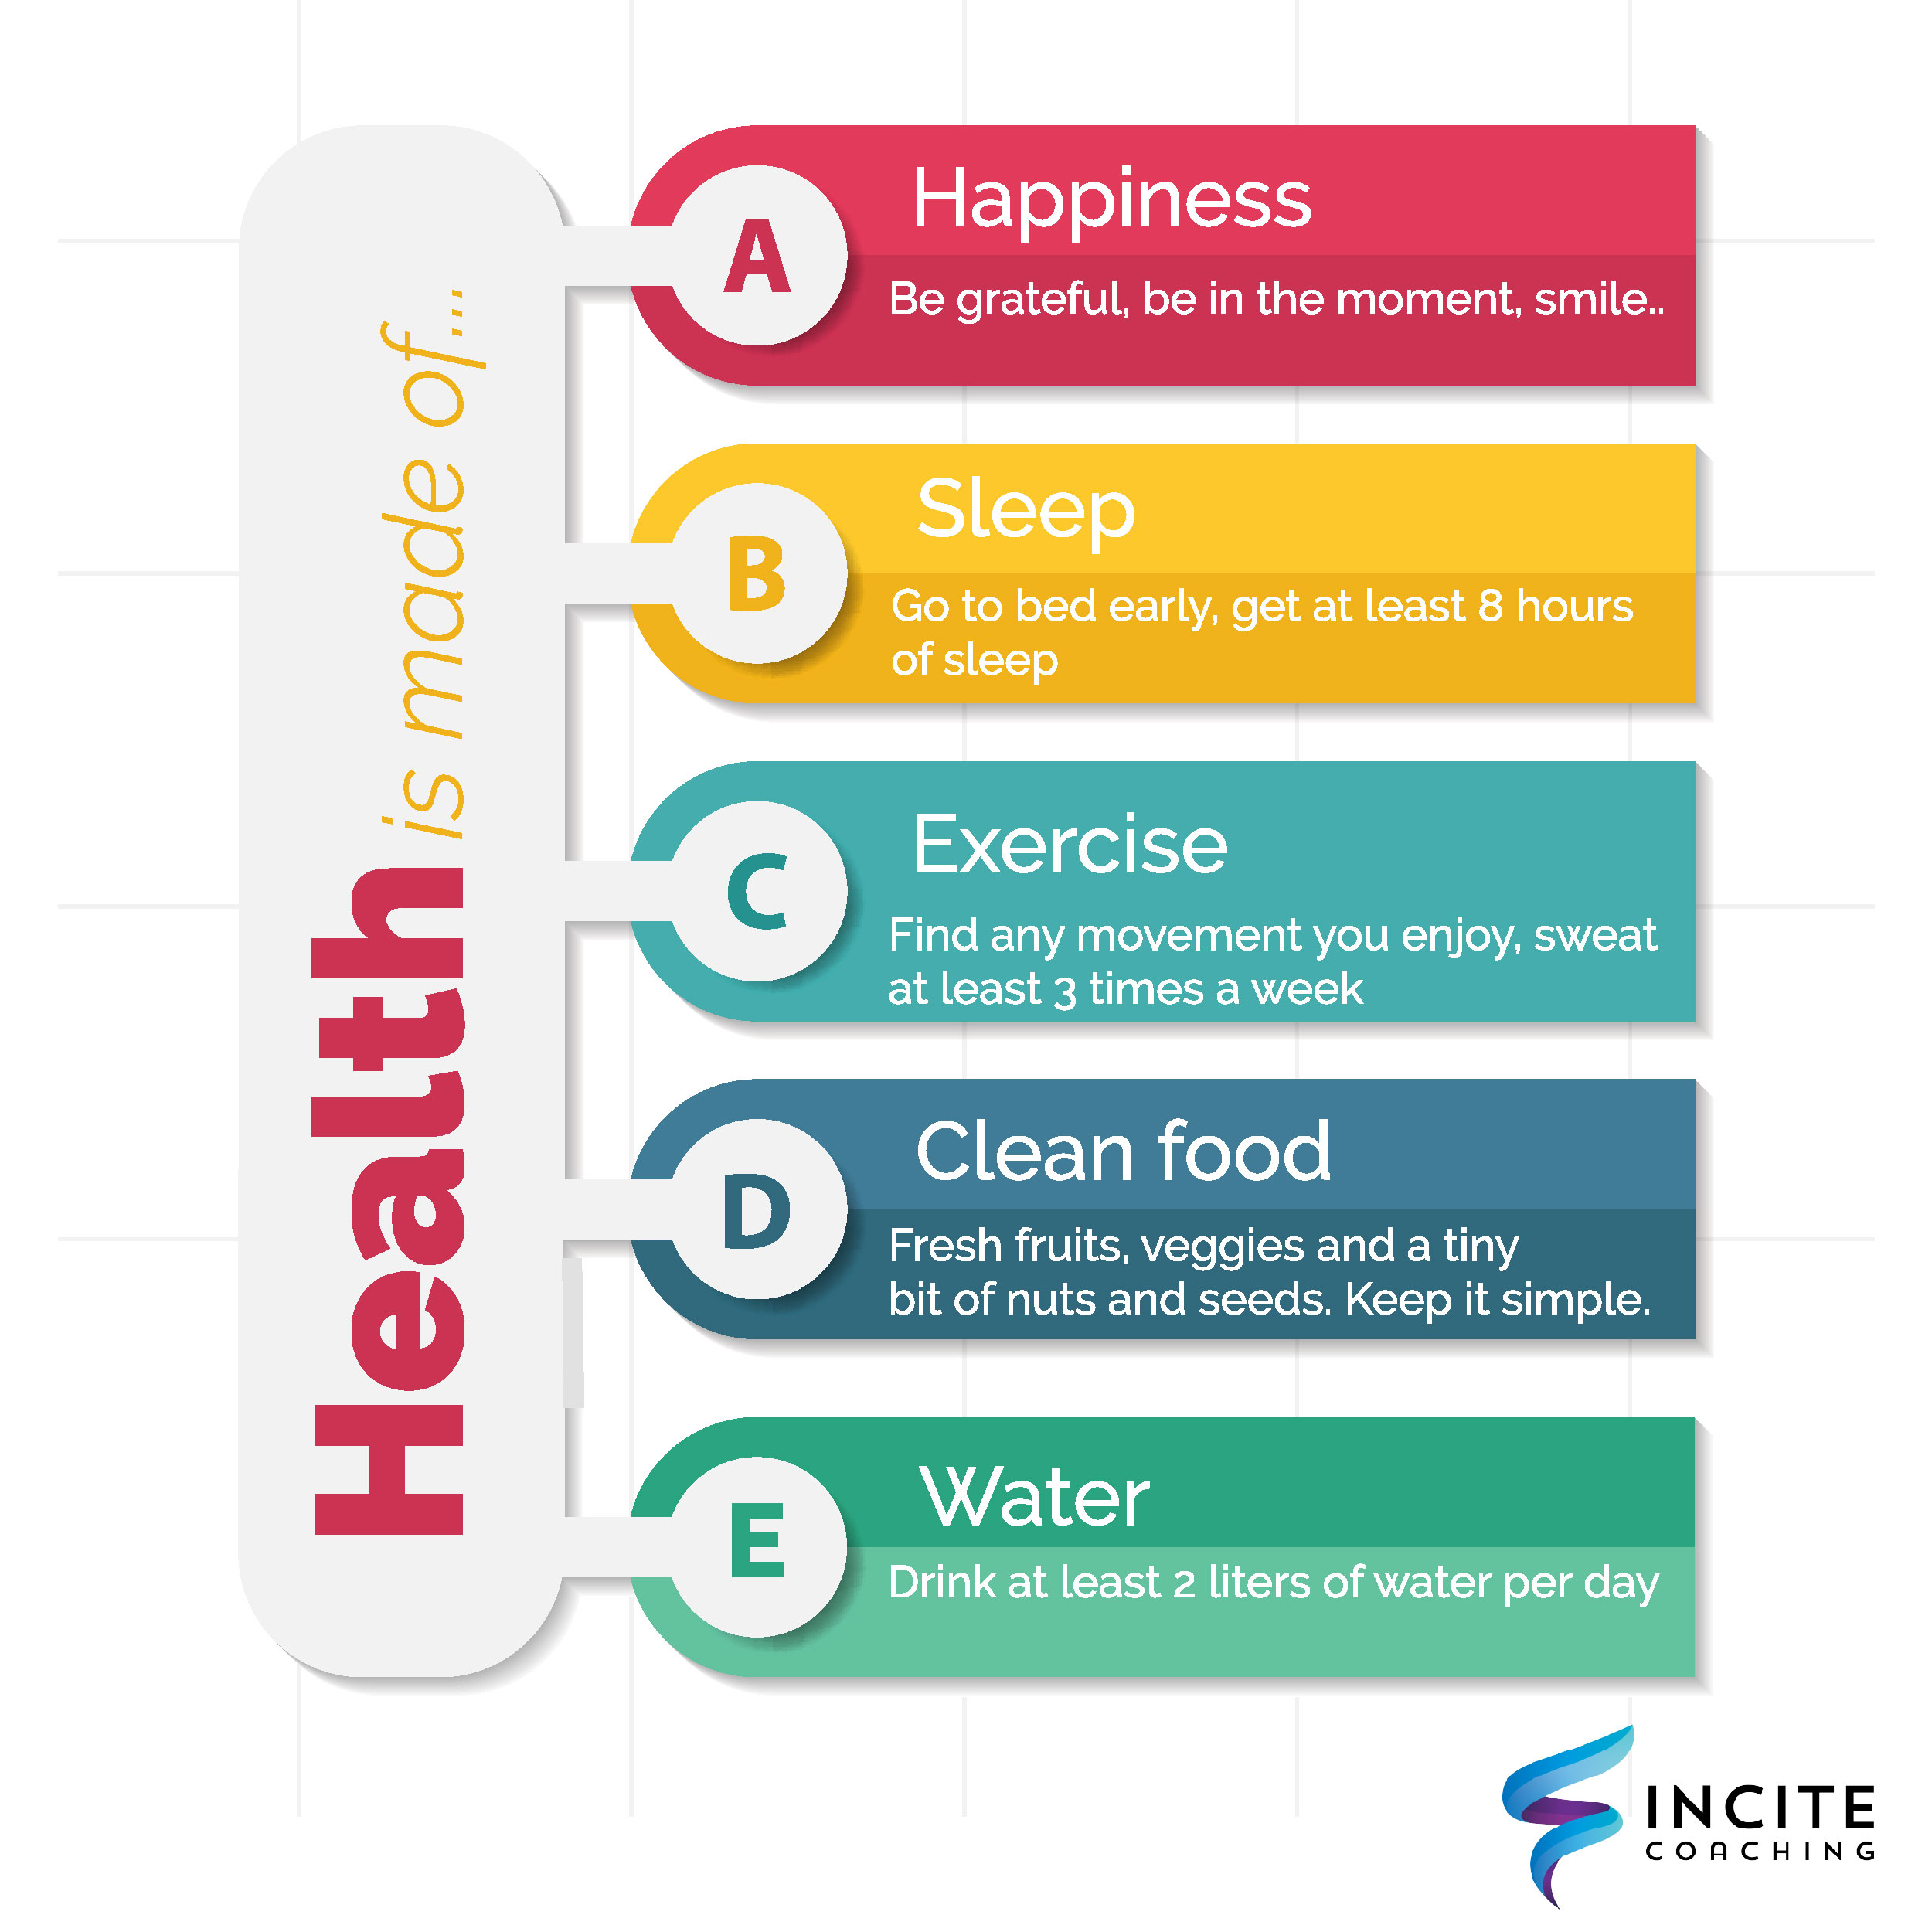 Health is Made of... 5 Elements